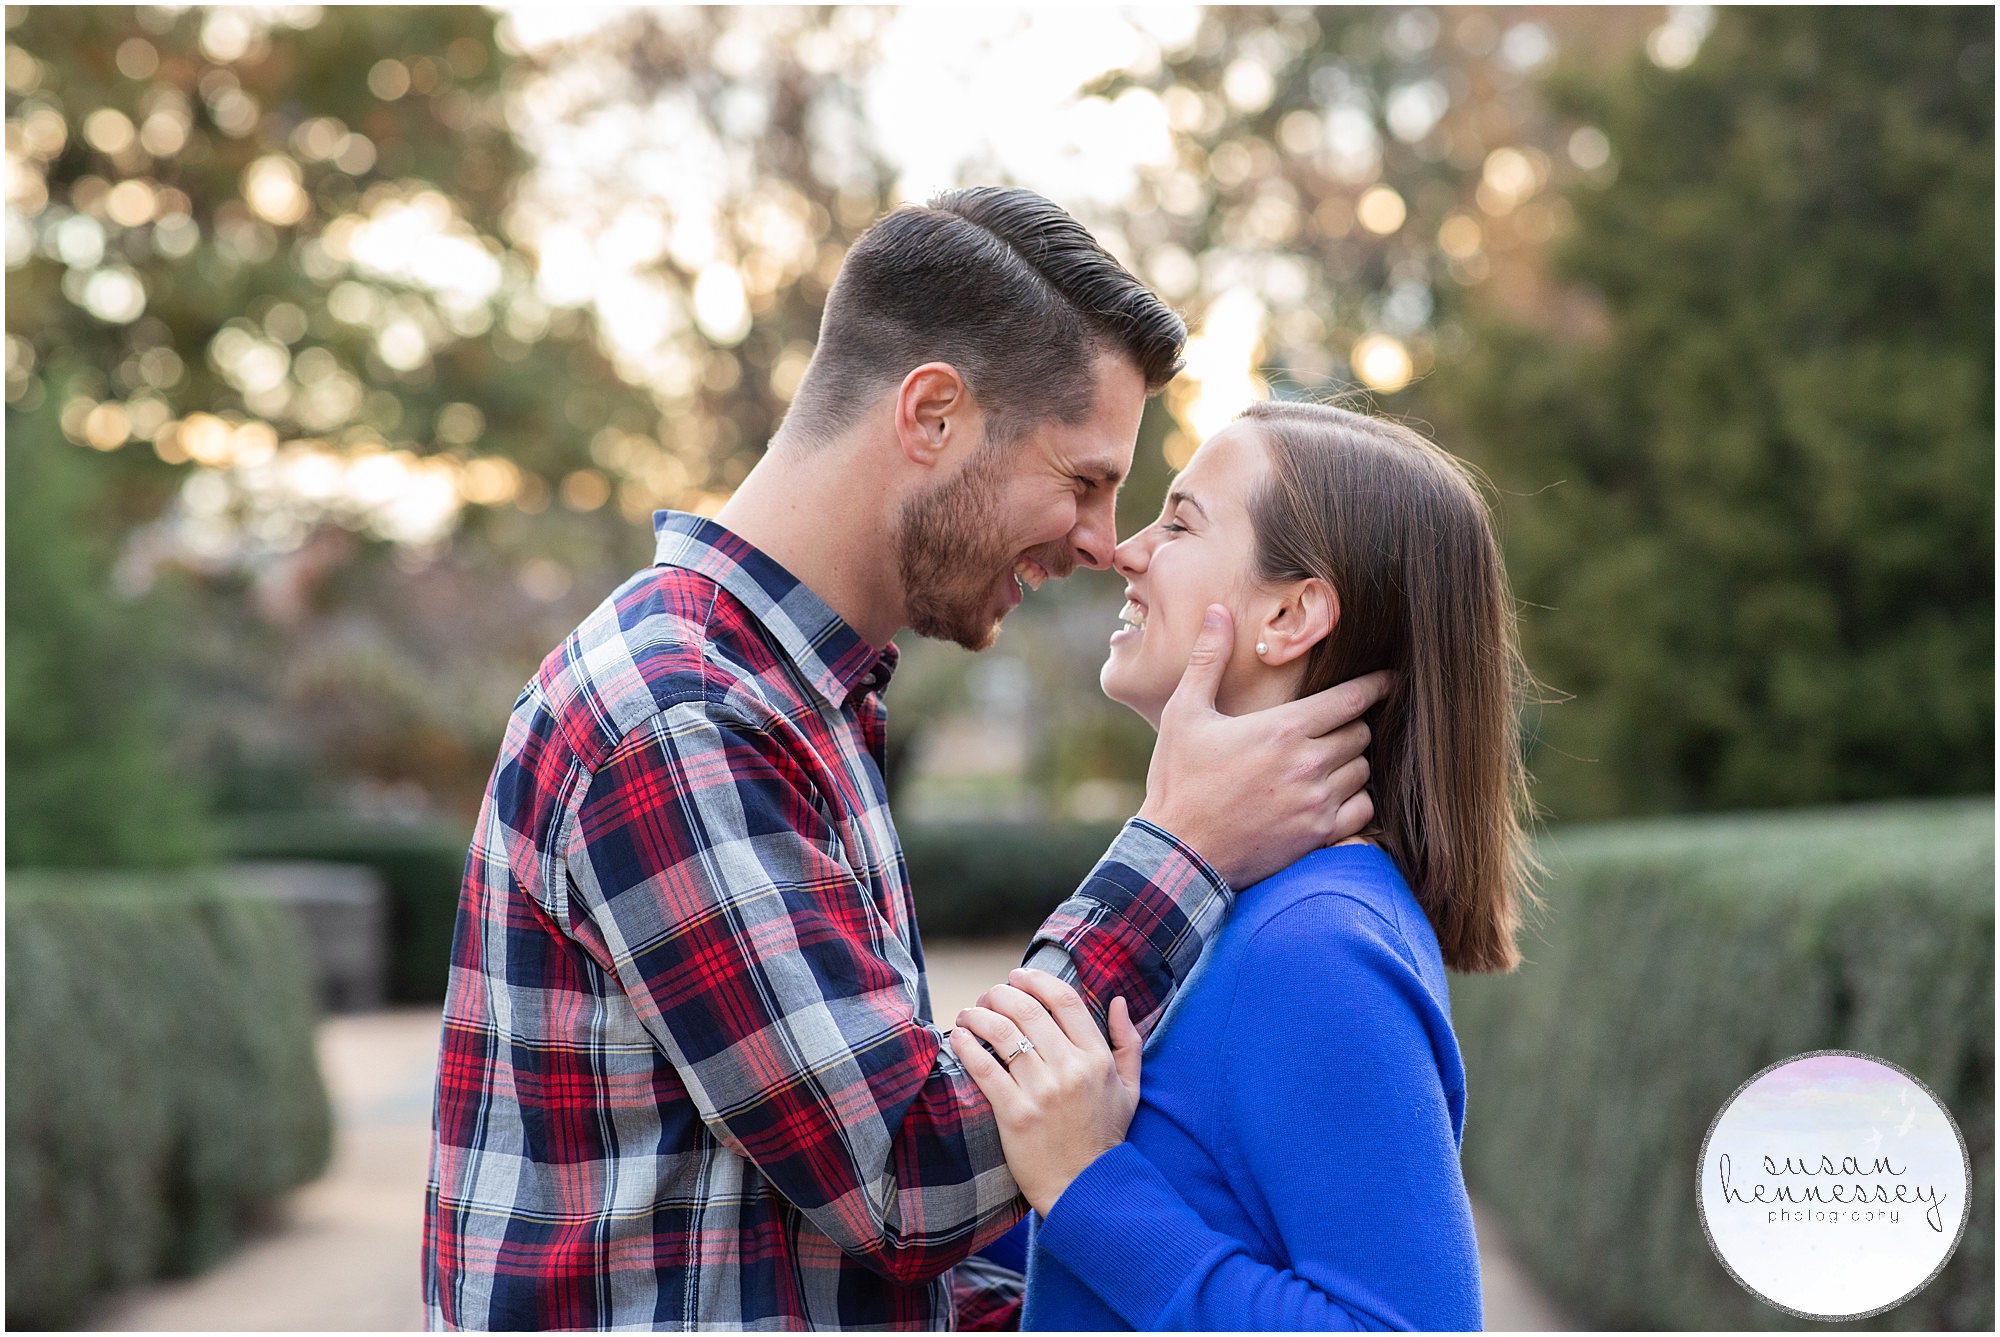 Winter engagement session in Philly